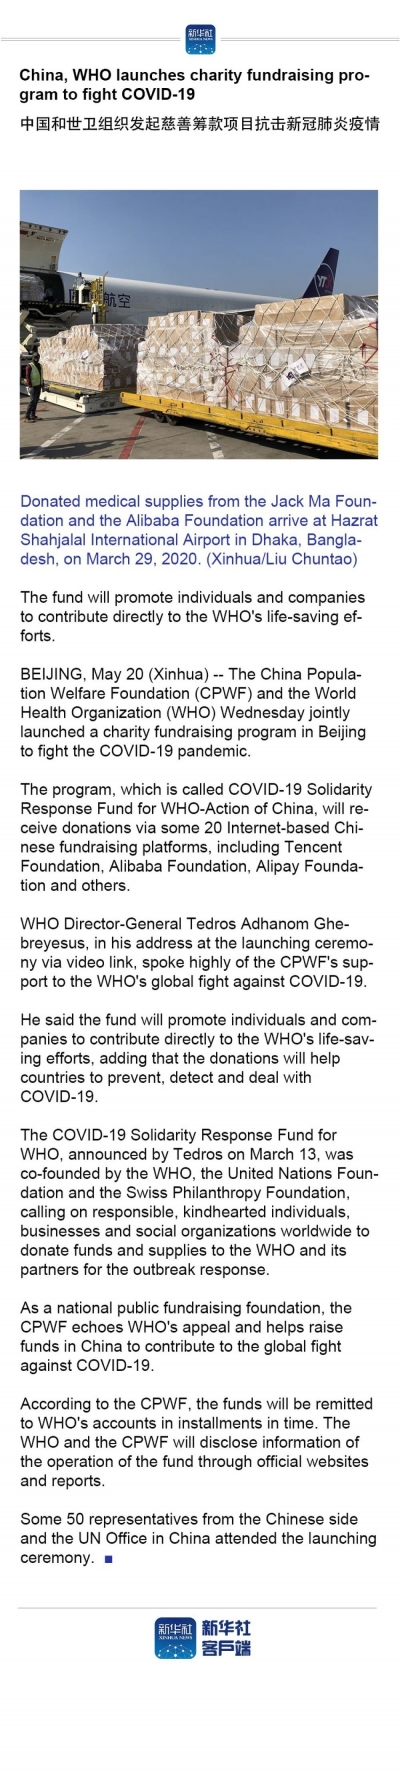 China, WHO launches charity fundraising program to fight COVID-19